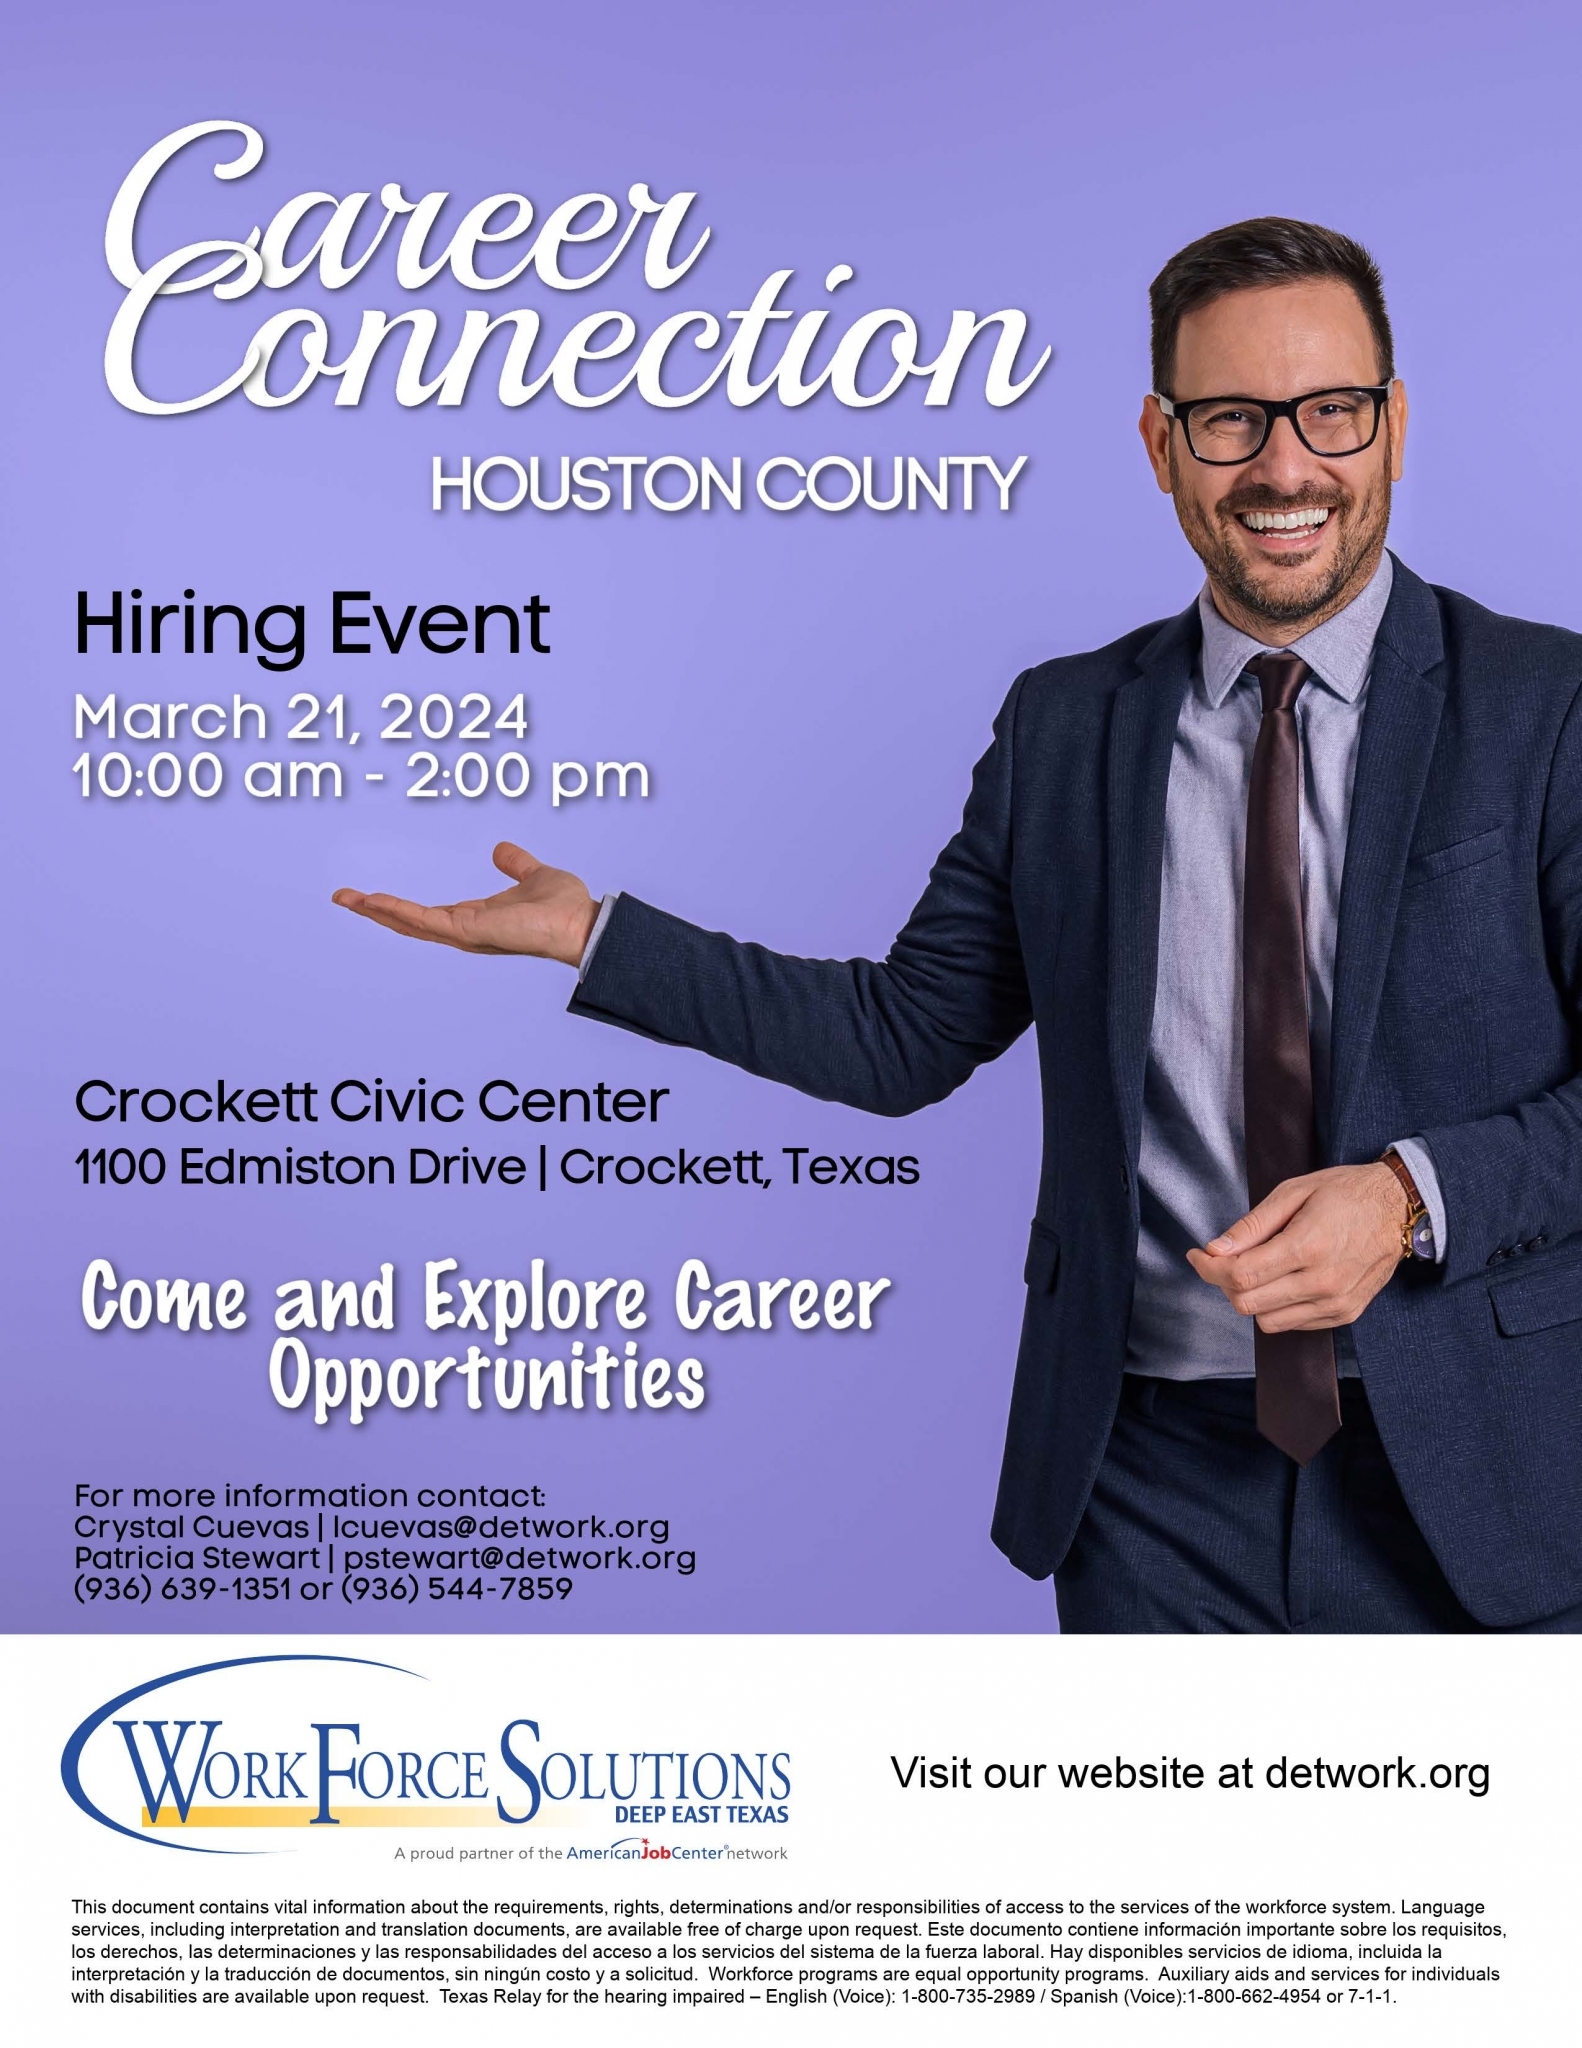 Career Connection in Houston County March 21, 2024